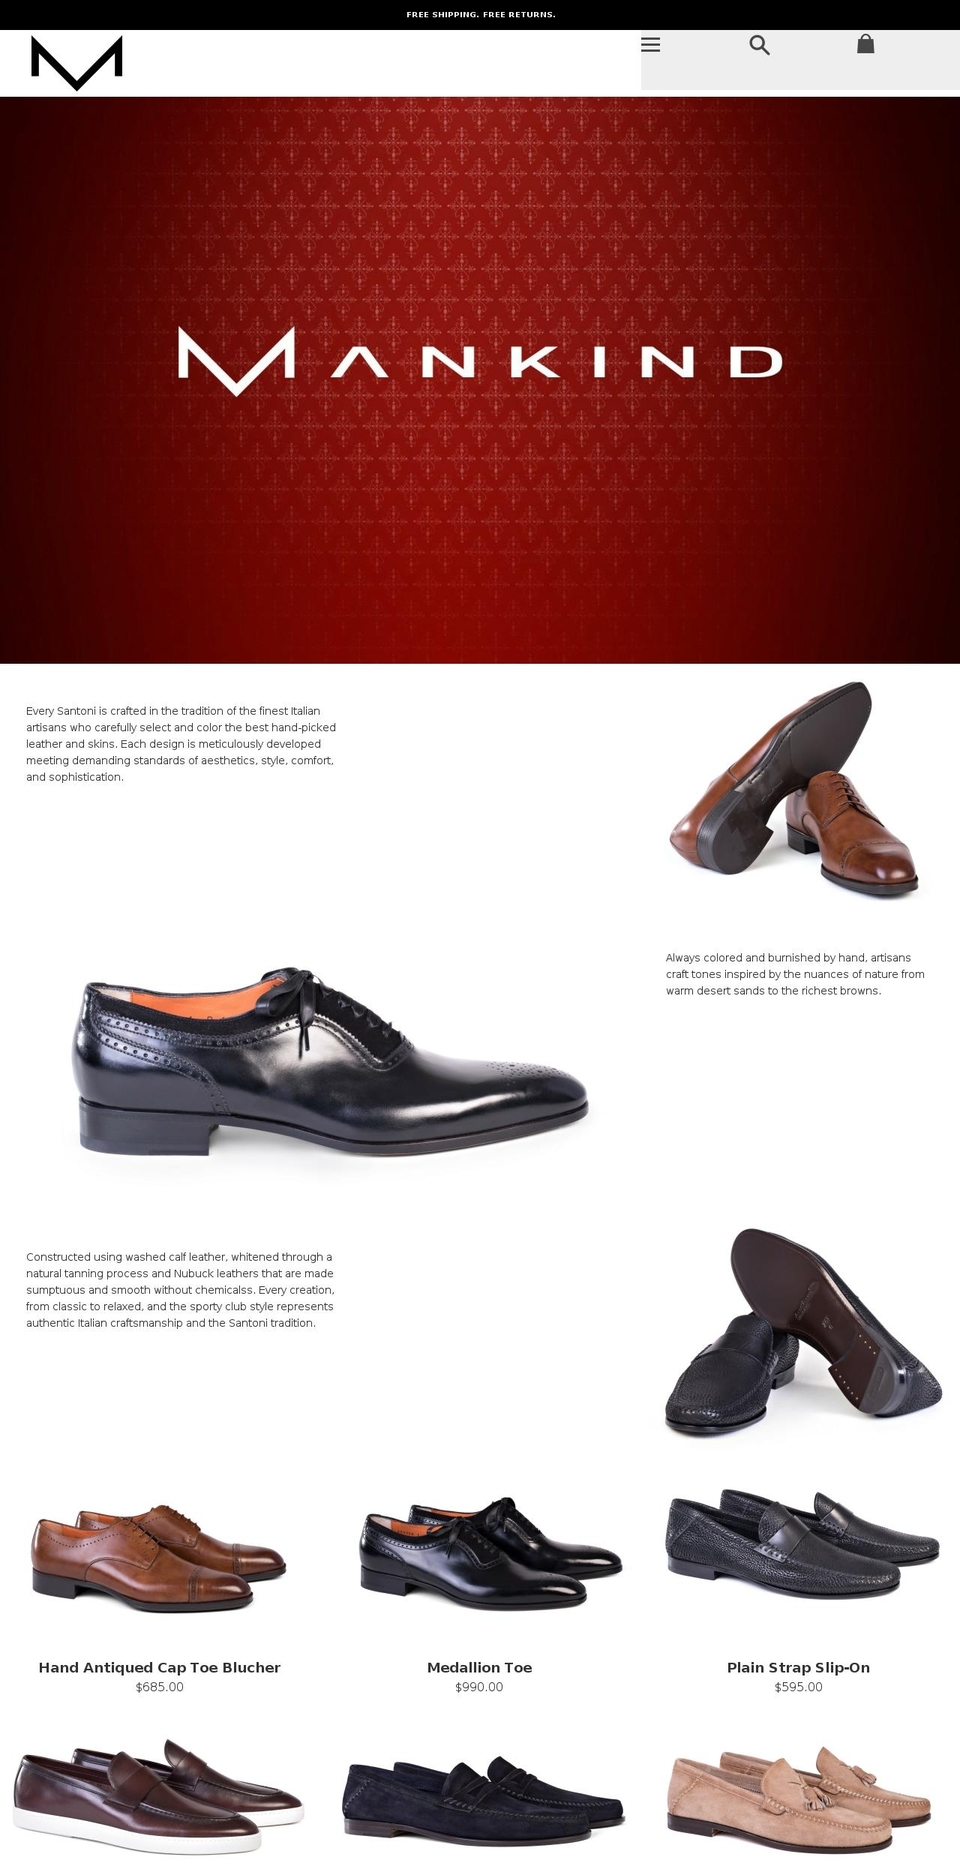 Live Shopify theme site example mankindshoes.com